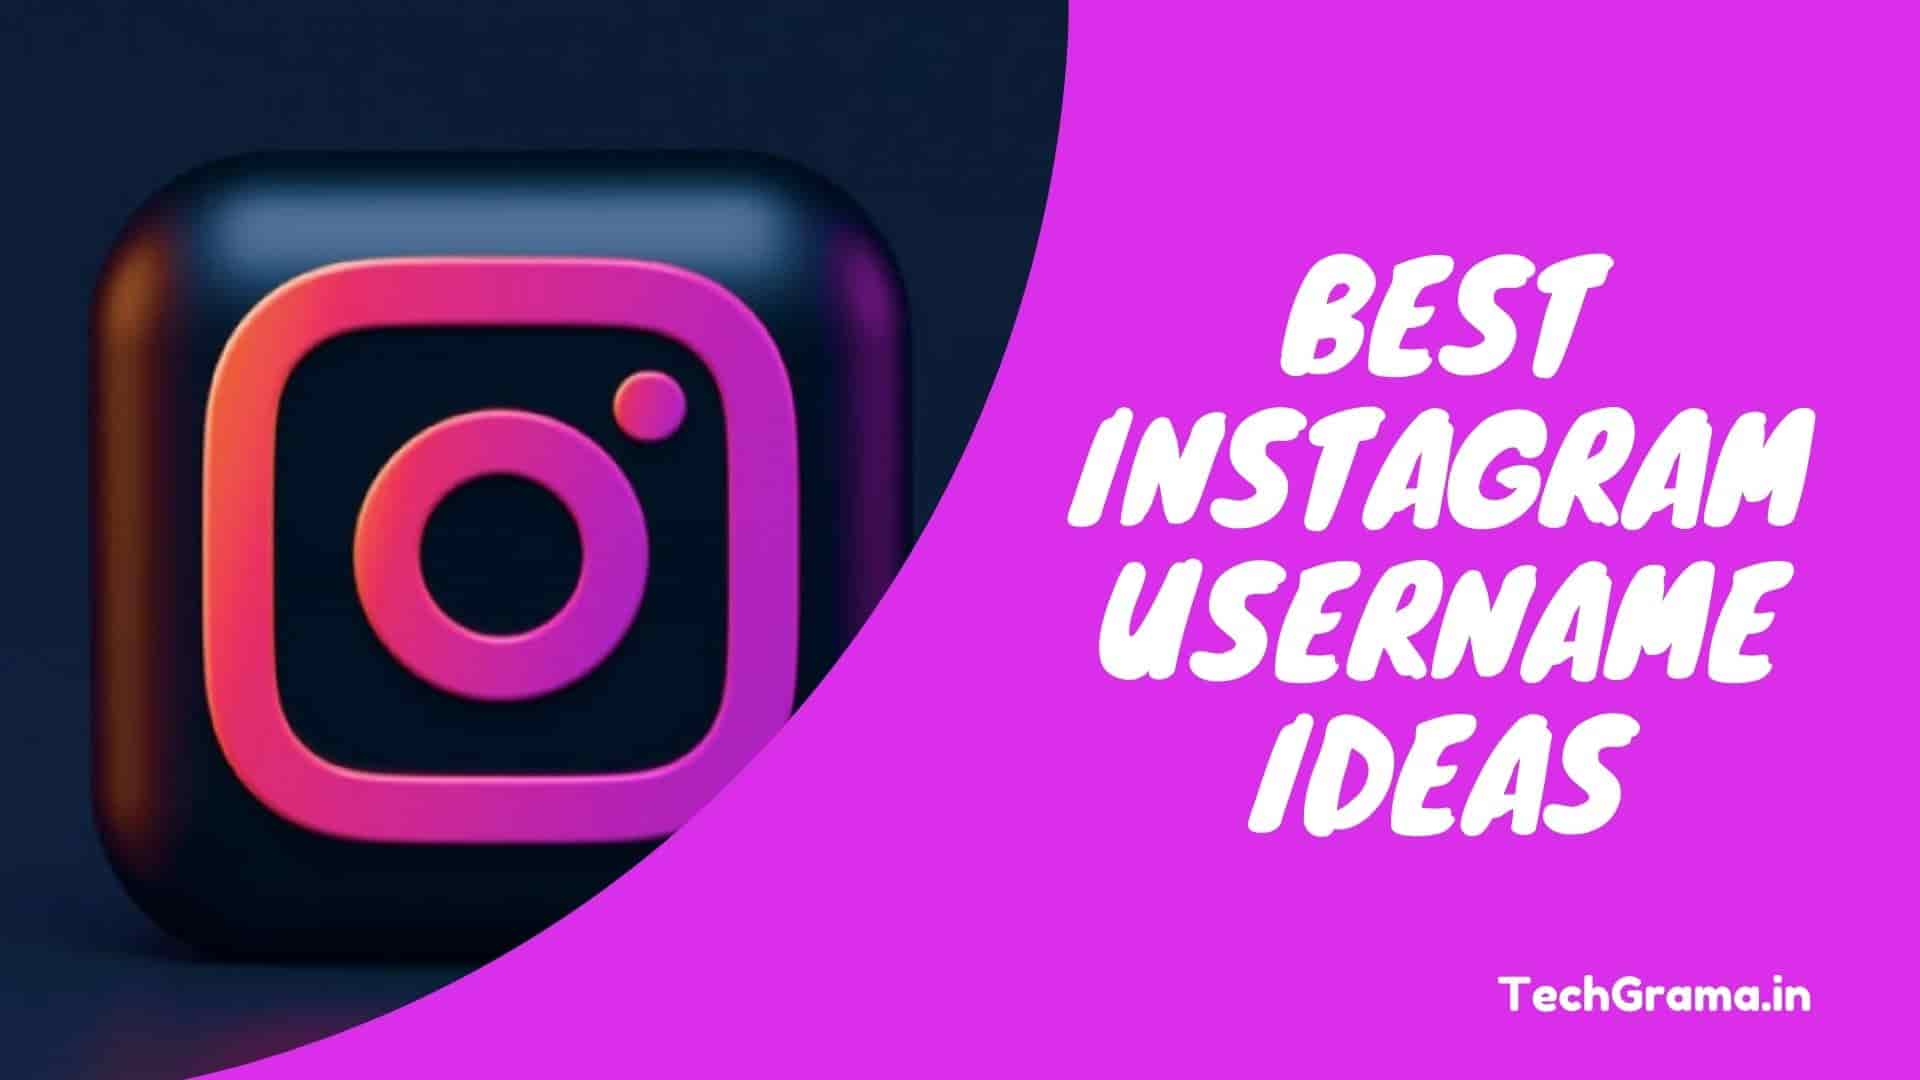 Unique Stylish Names For Instagram-2020  Stylish name, Name for instagram,  Cool names